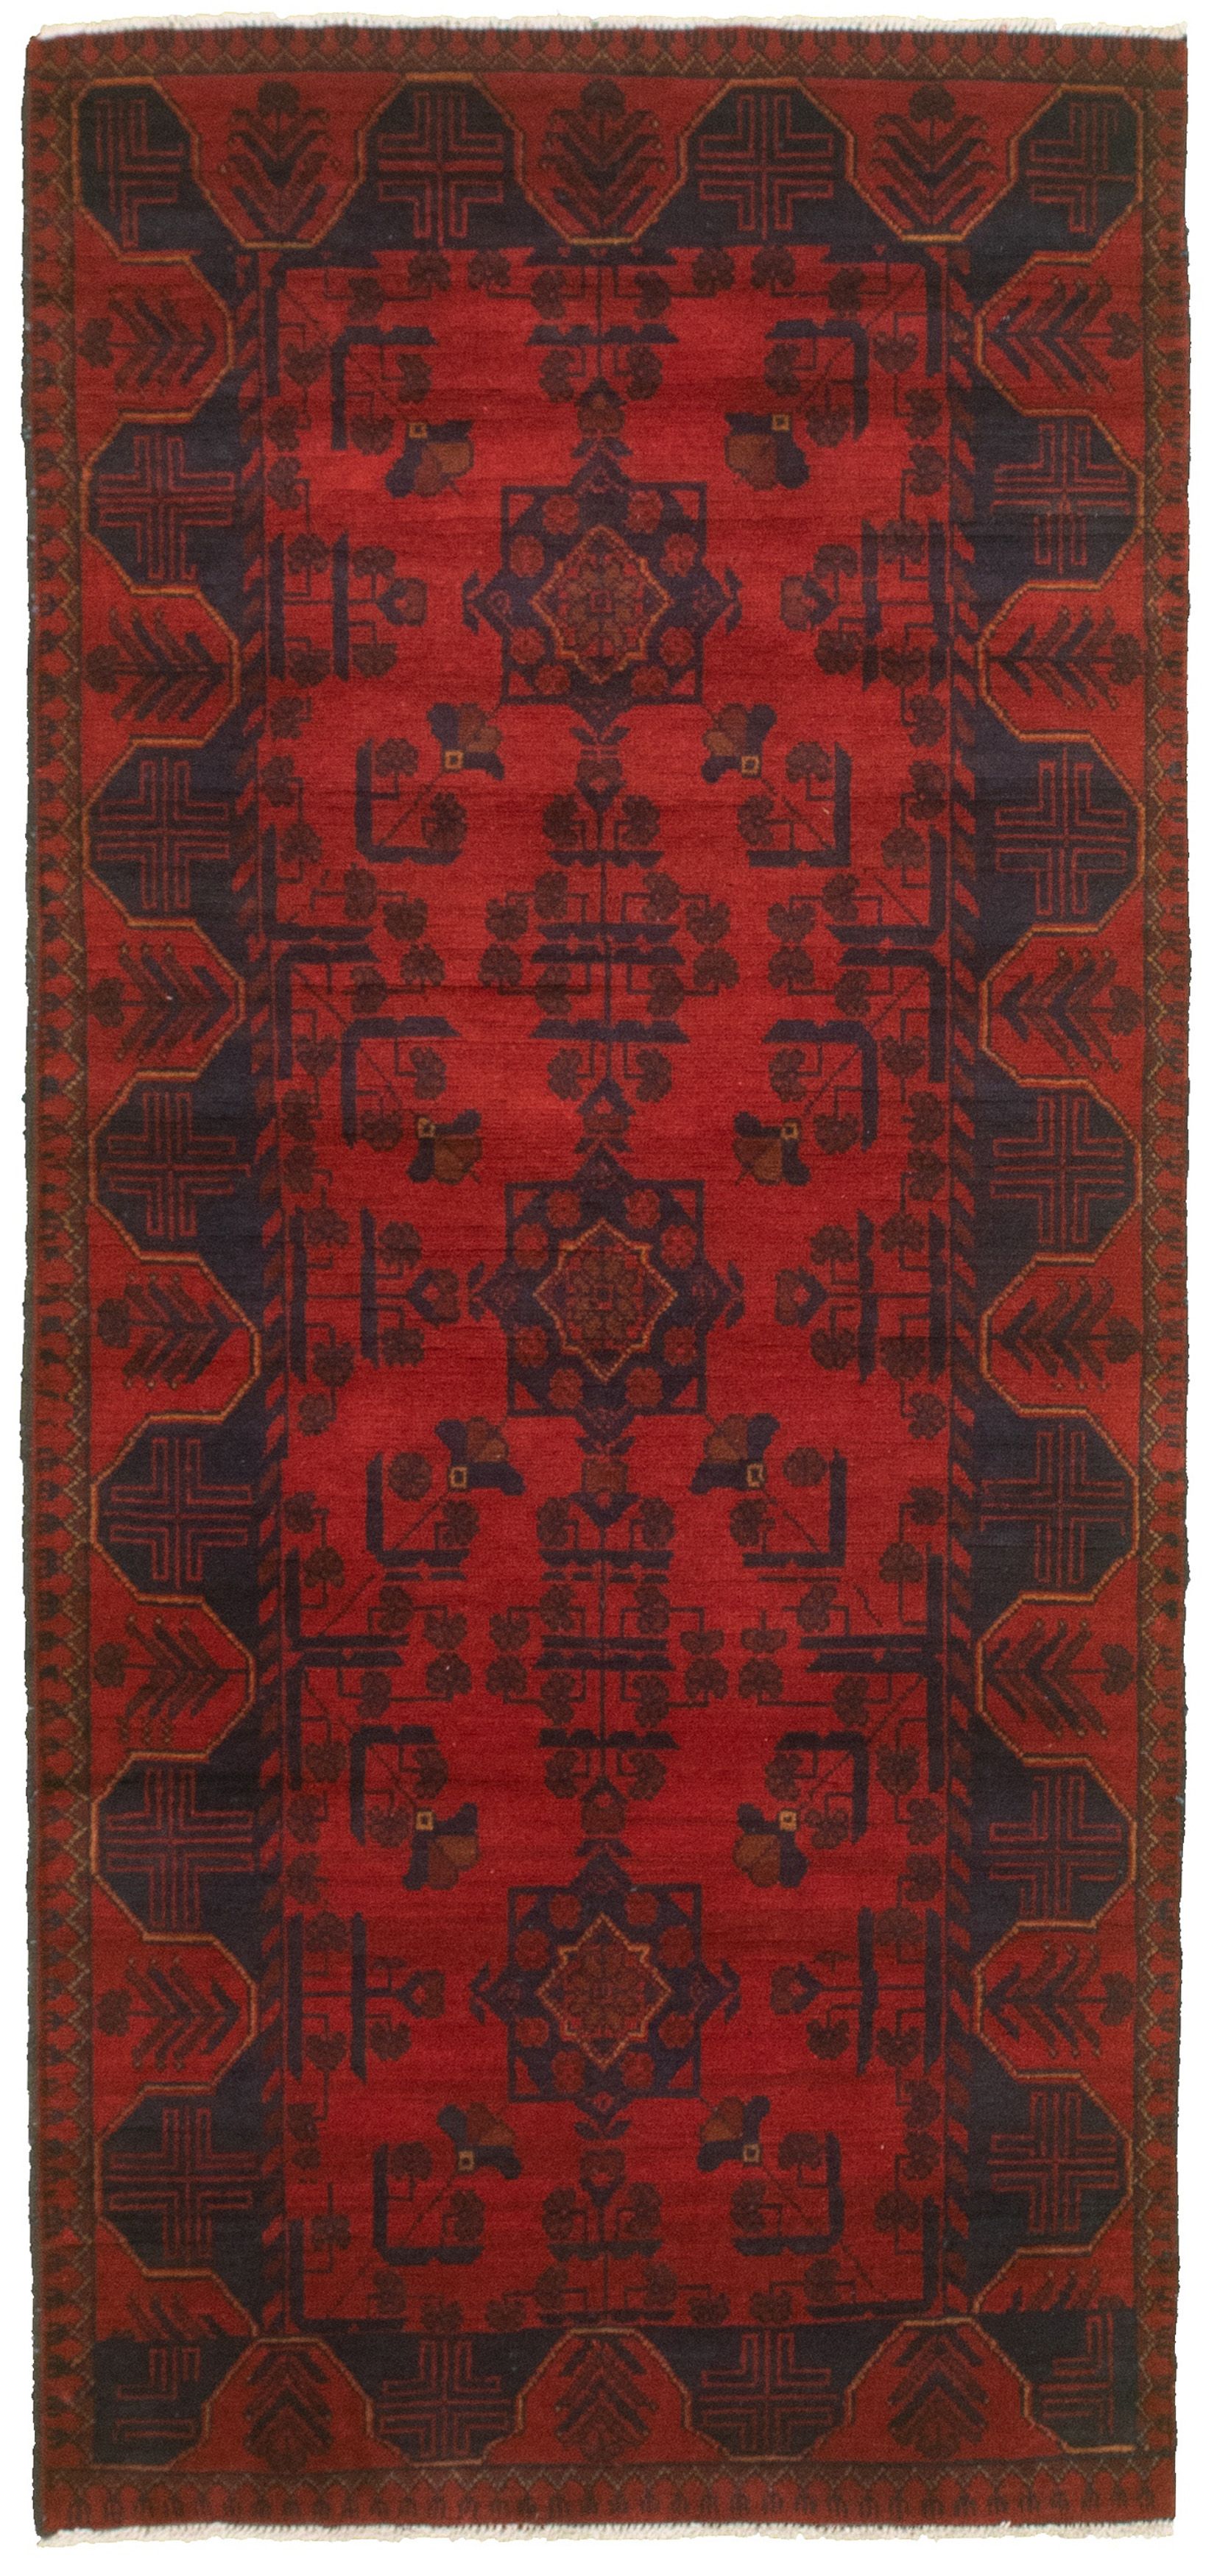 Hand-knotted Finest Khal Mohammadi Red  Rug 2'10" x 6'2" Size: 2'10" x 6'2"  